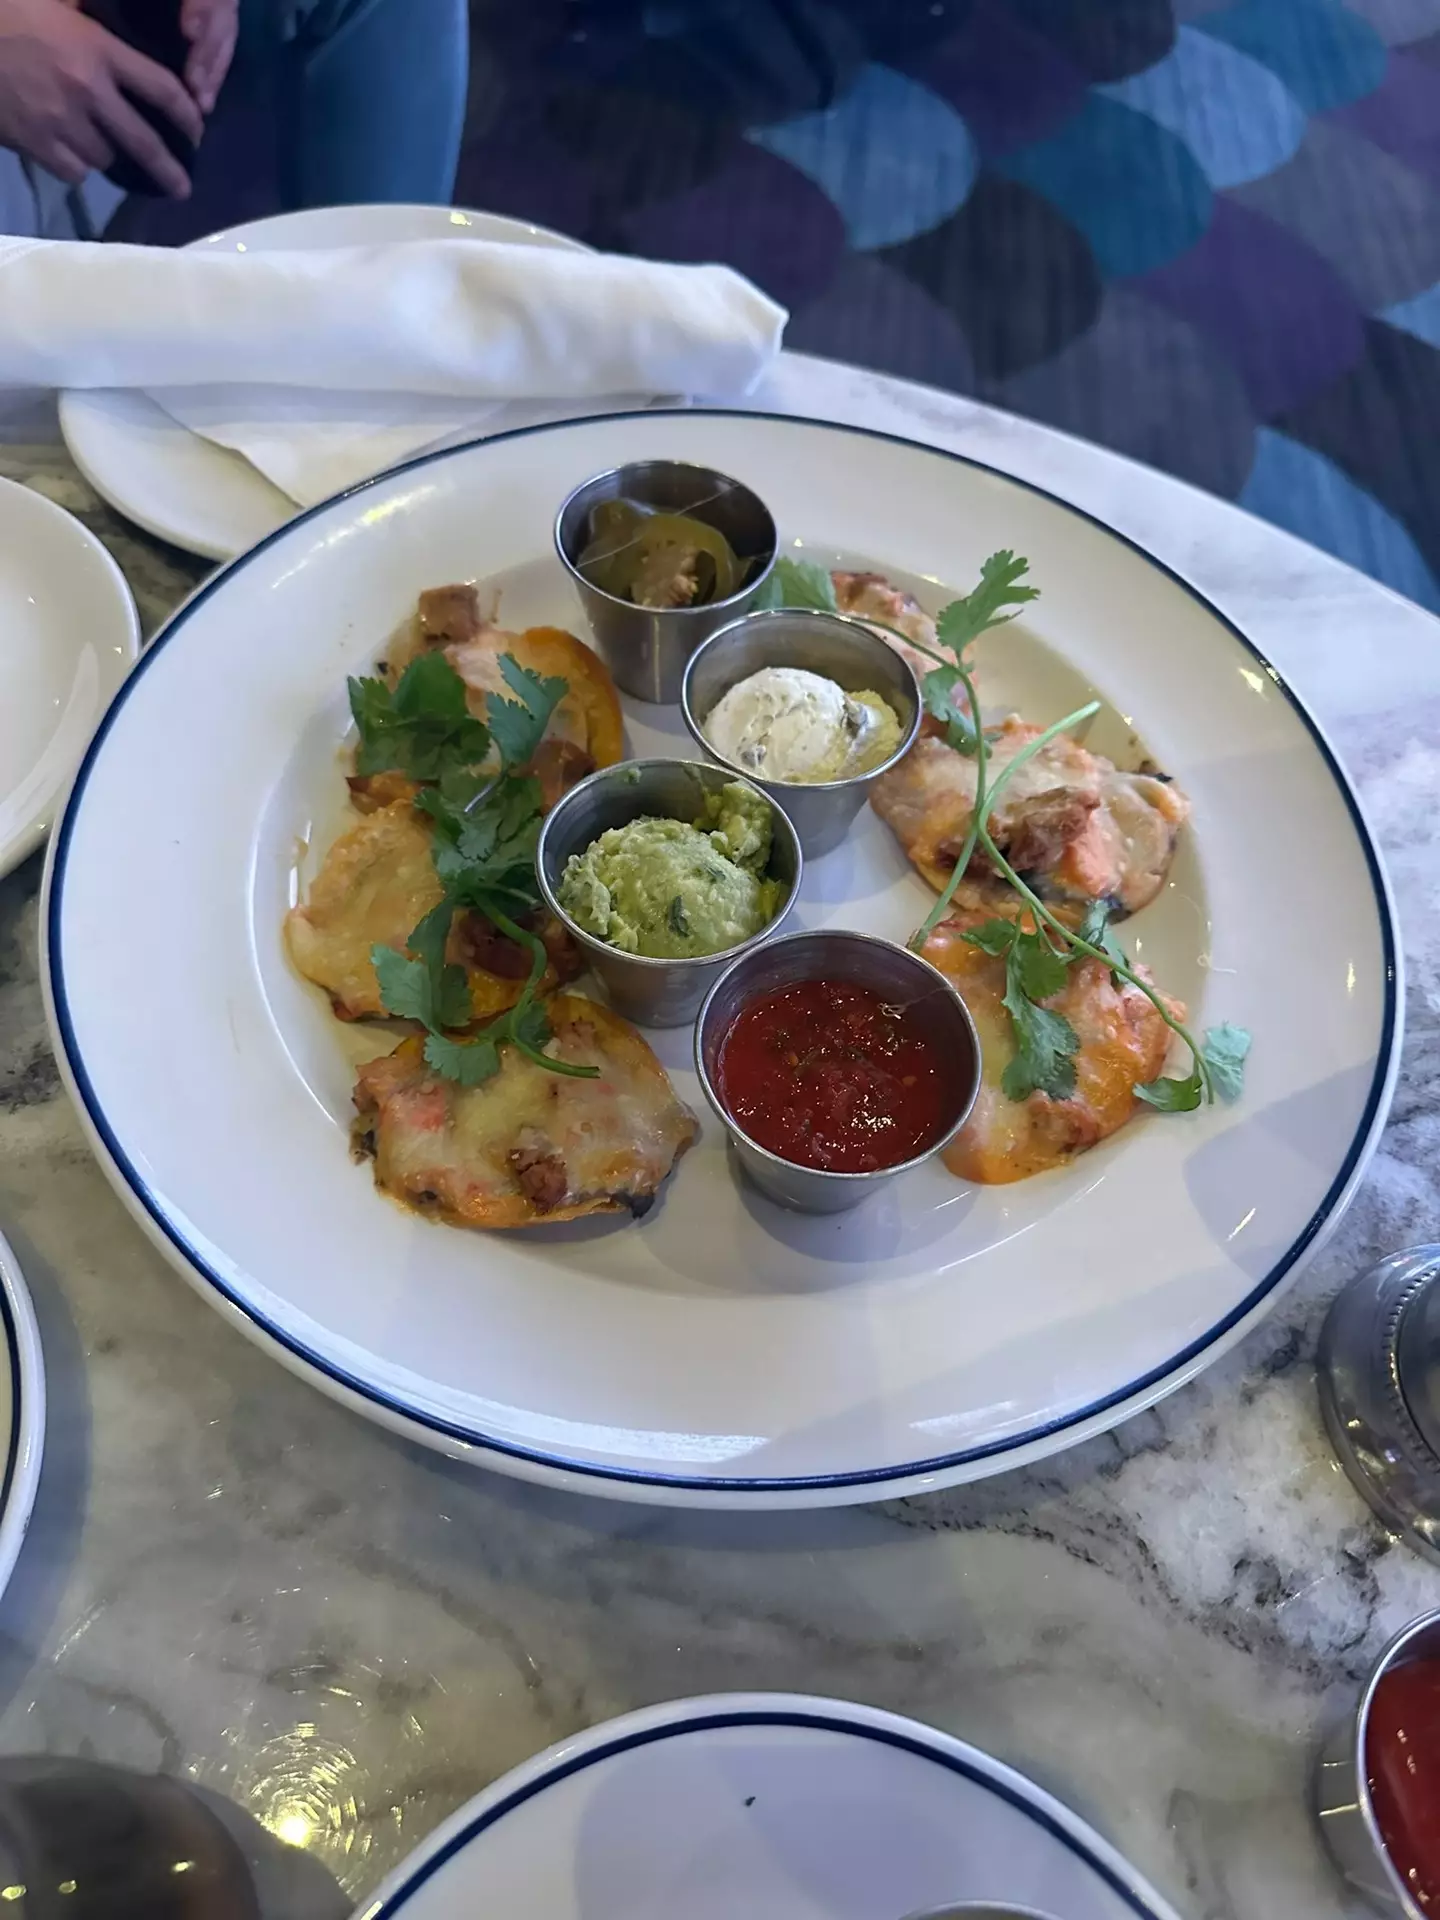 Las Vegas' Fountainbleau hotel was mercilessly mocked after its pathetic portion of nachos was shared online.